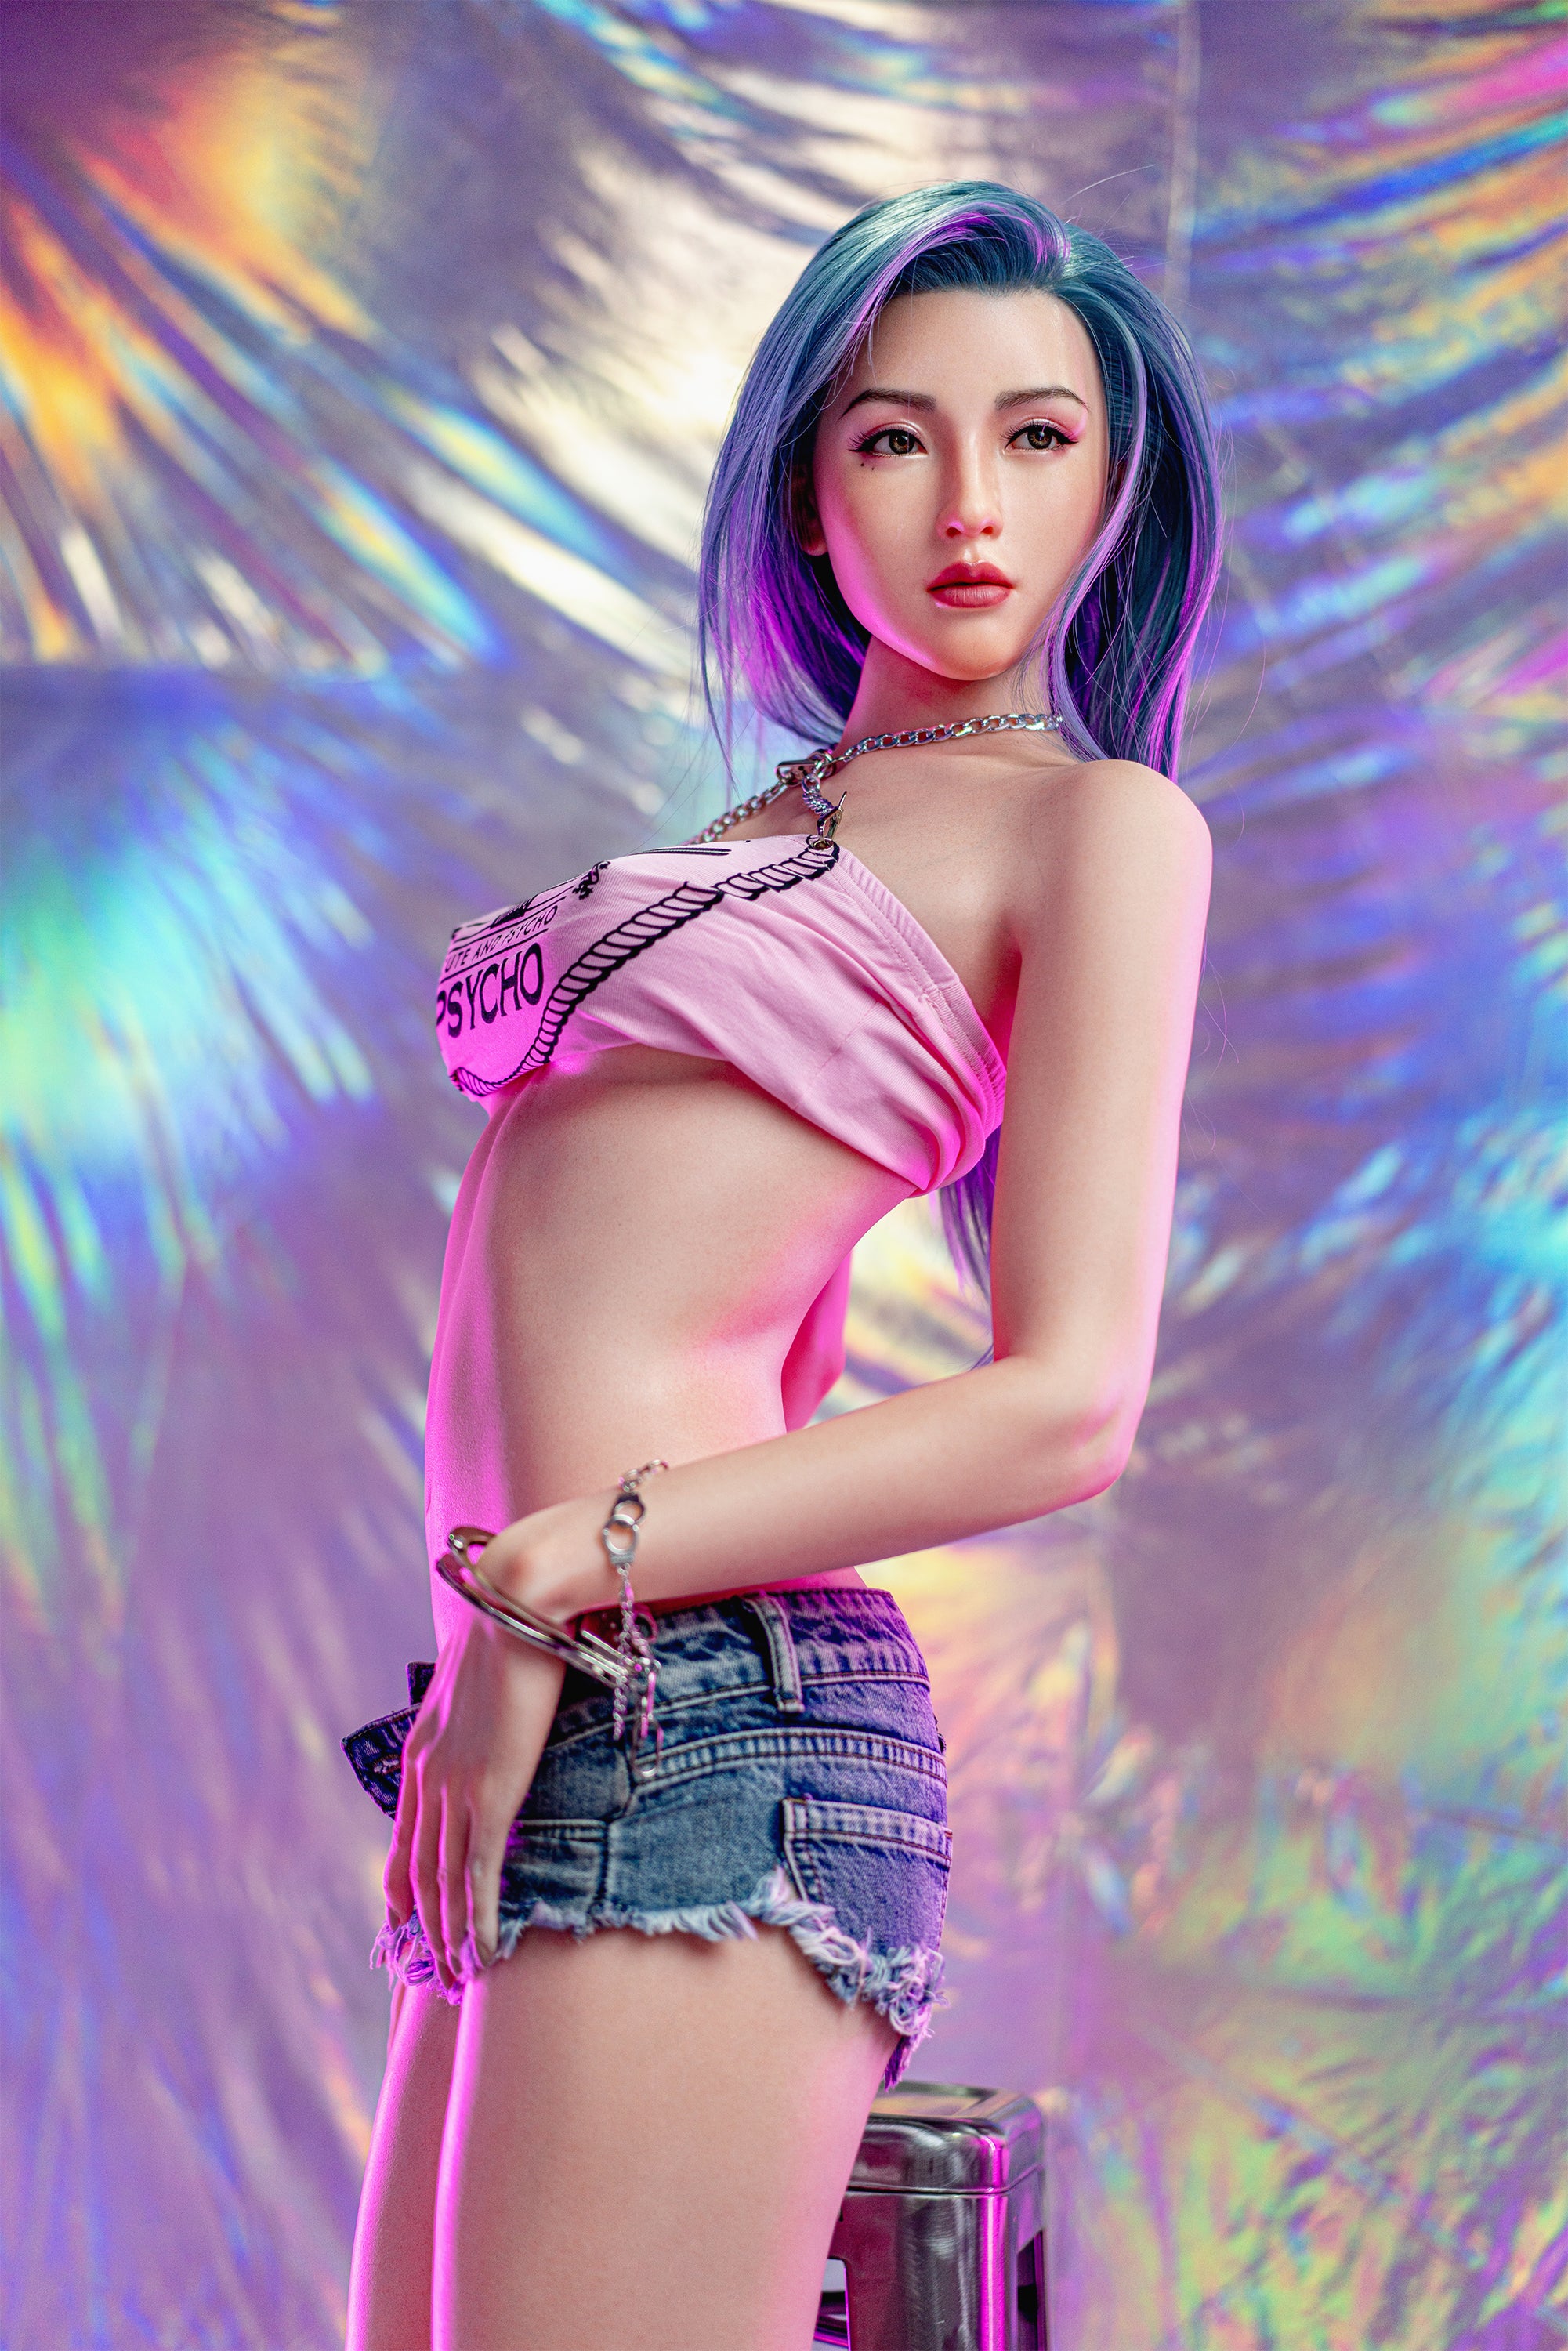 Zelex Doll 170 cm C Silicone - Yvonne | Buy Sex Dolls at DOLLS ACTUALLY